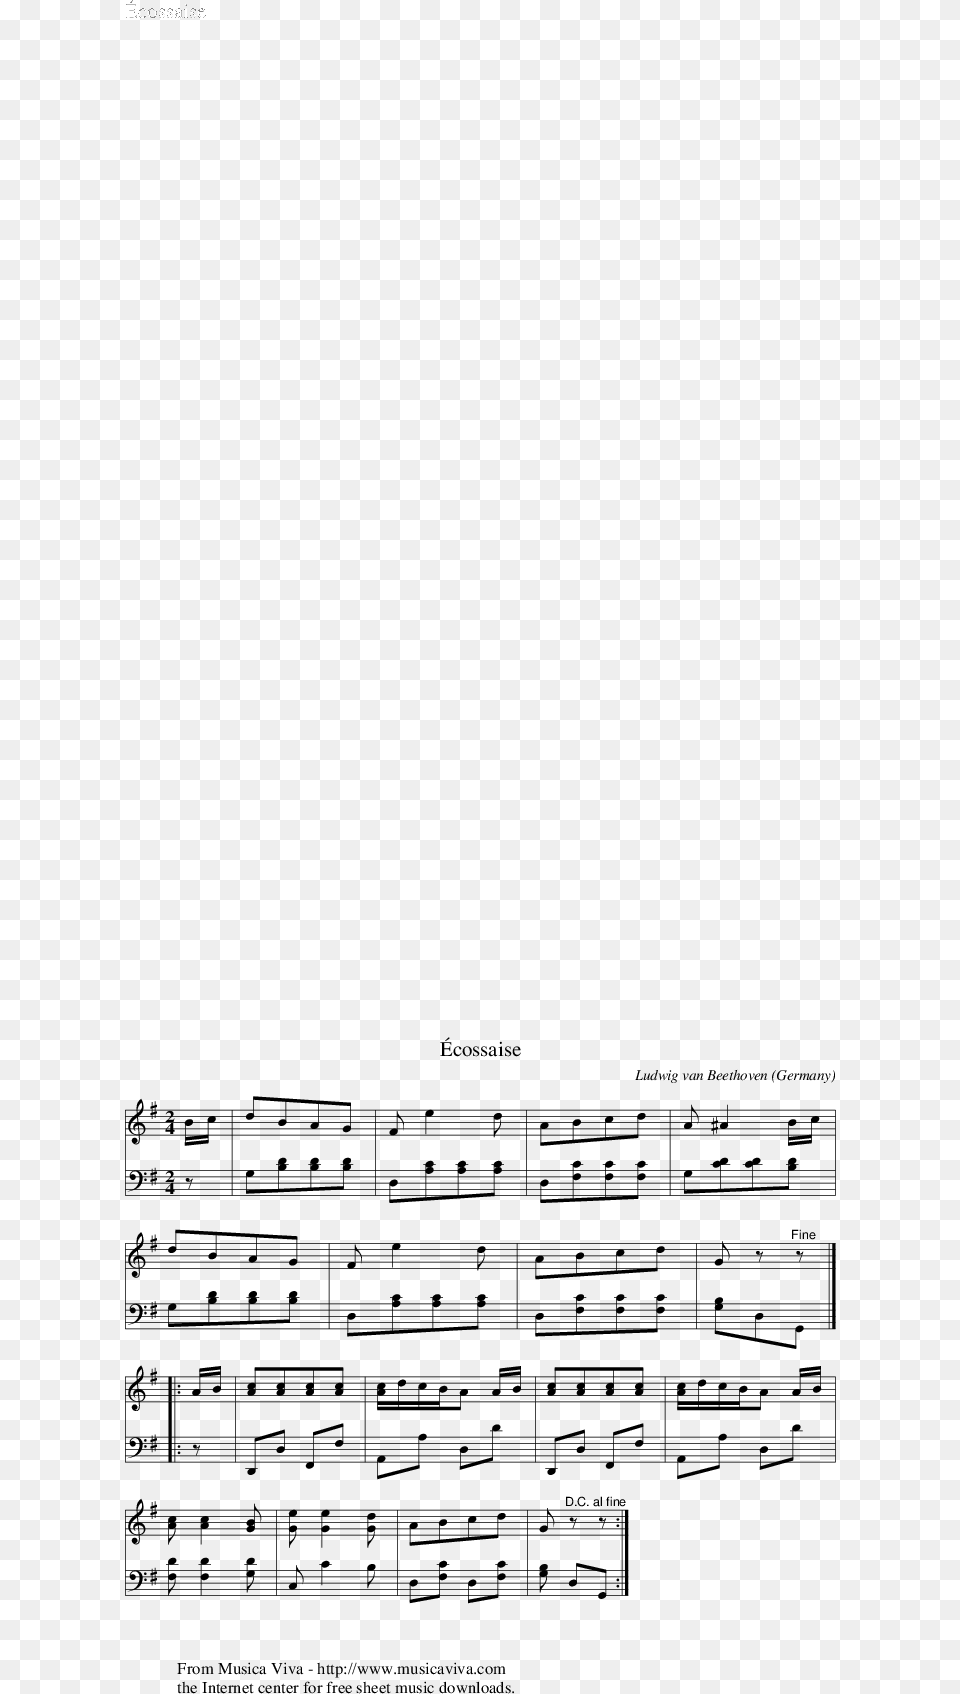 Listen To Ecossaise, Sheet Music Free Png Download